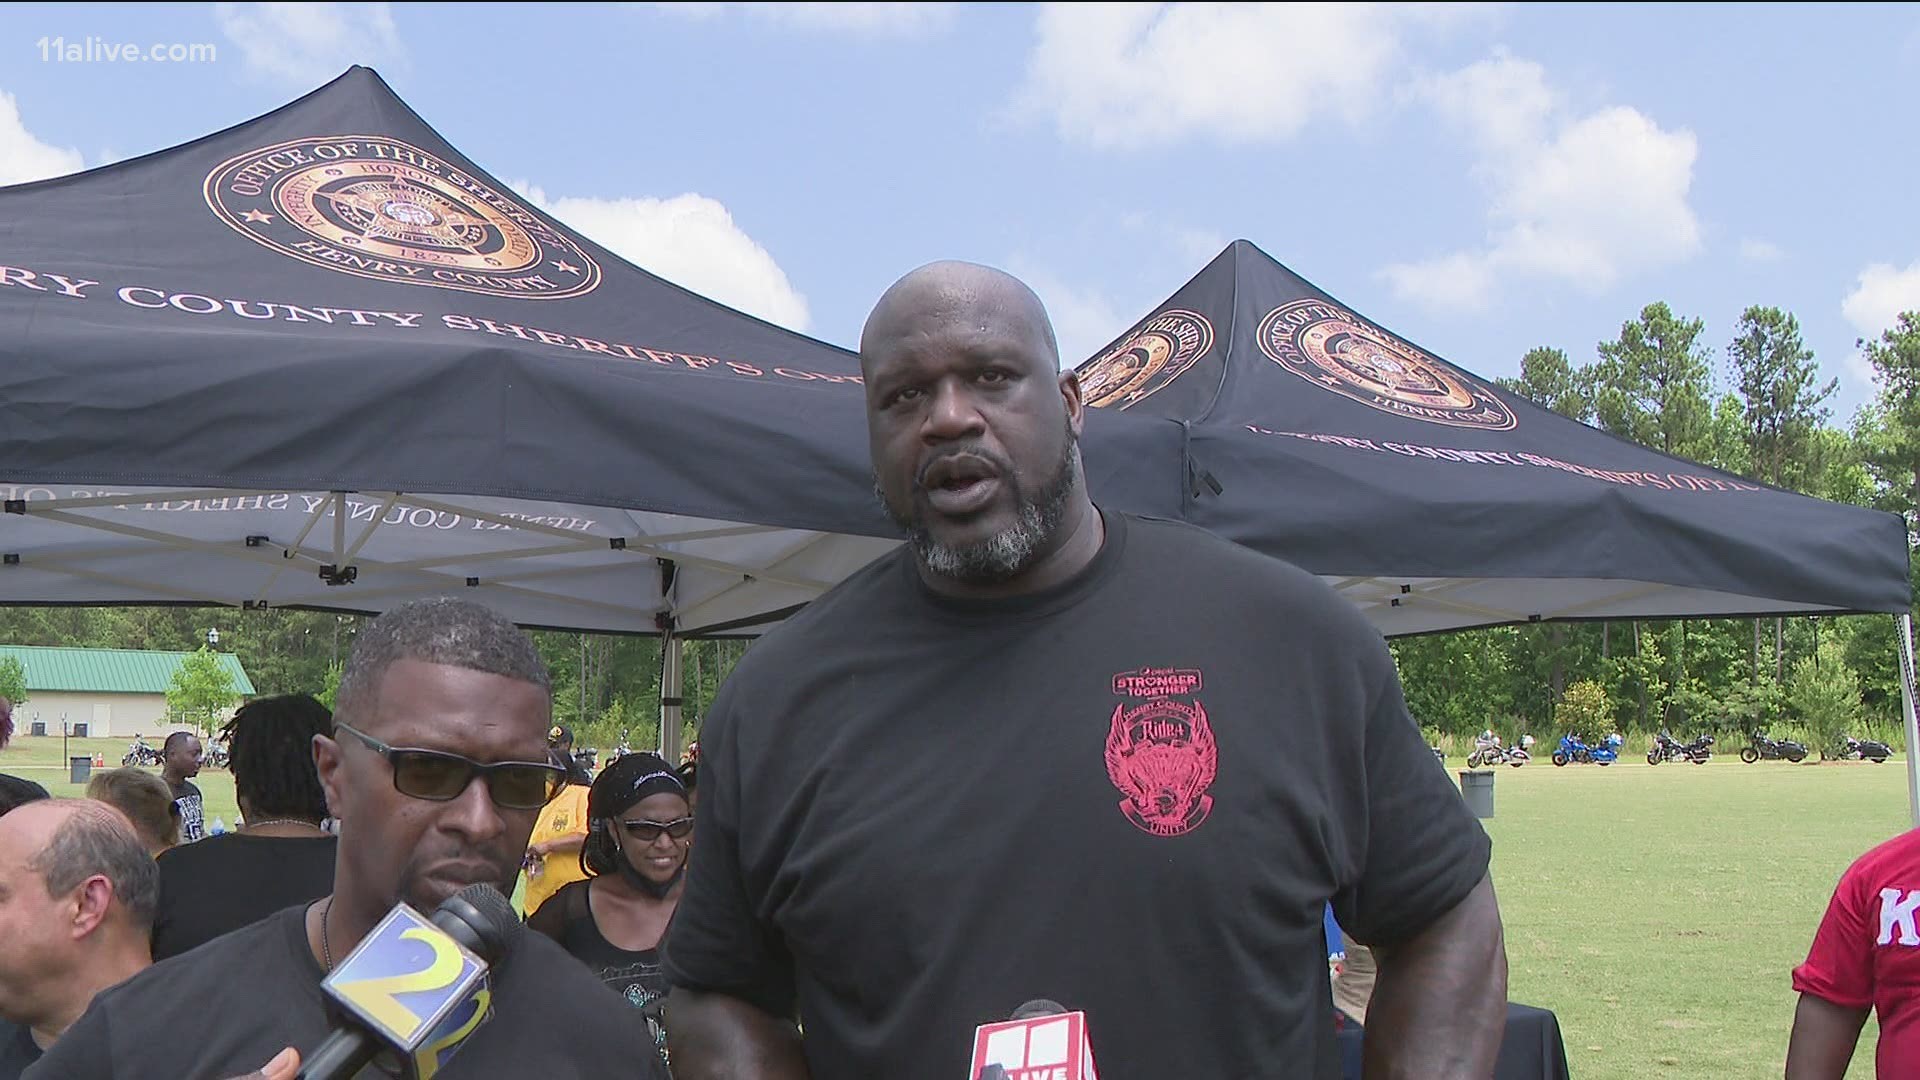 The event was part of an ongoing partnership between Shaq and the Henry County Sheriff's Office.